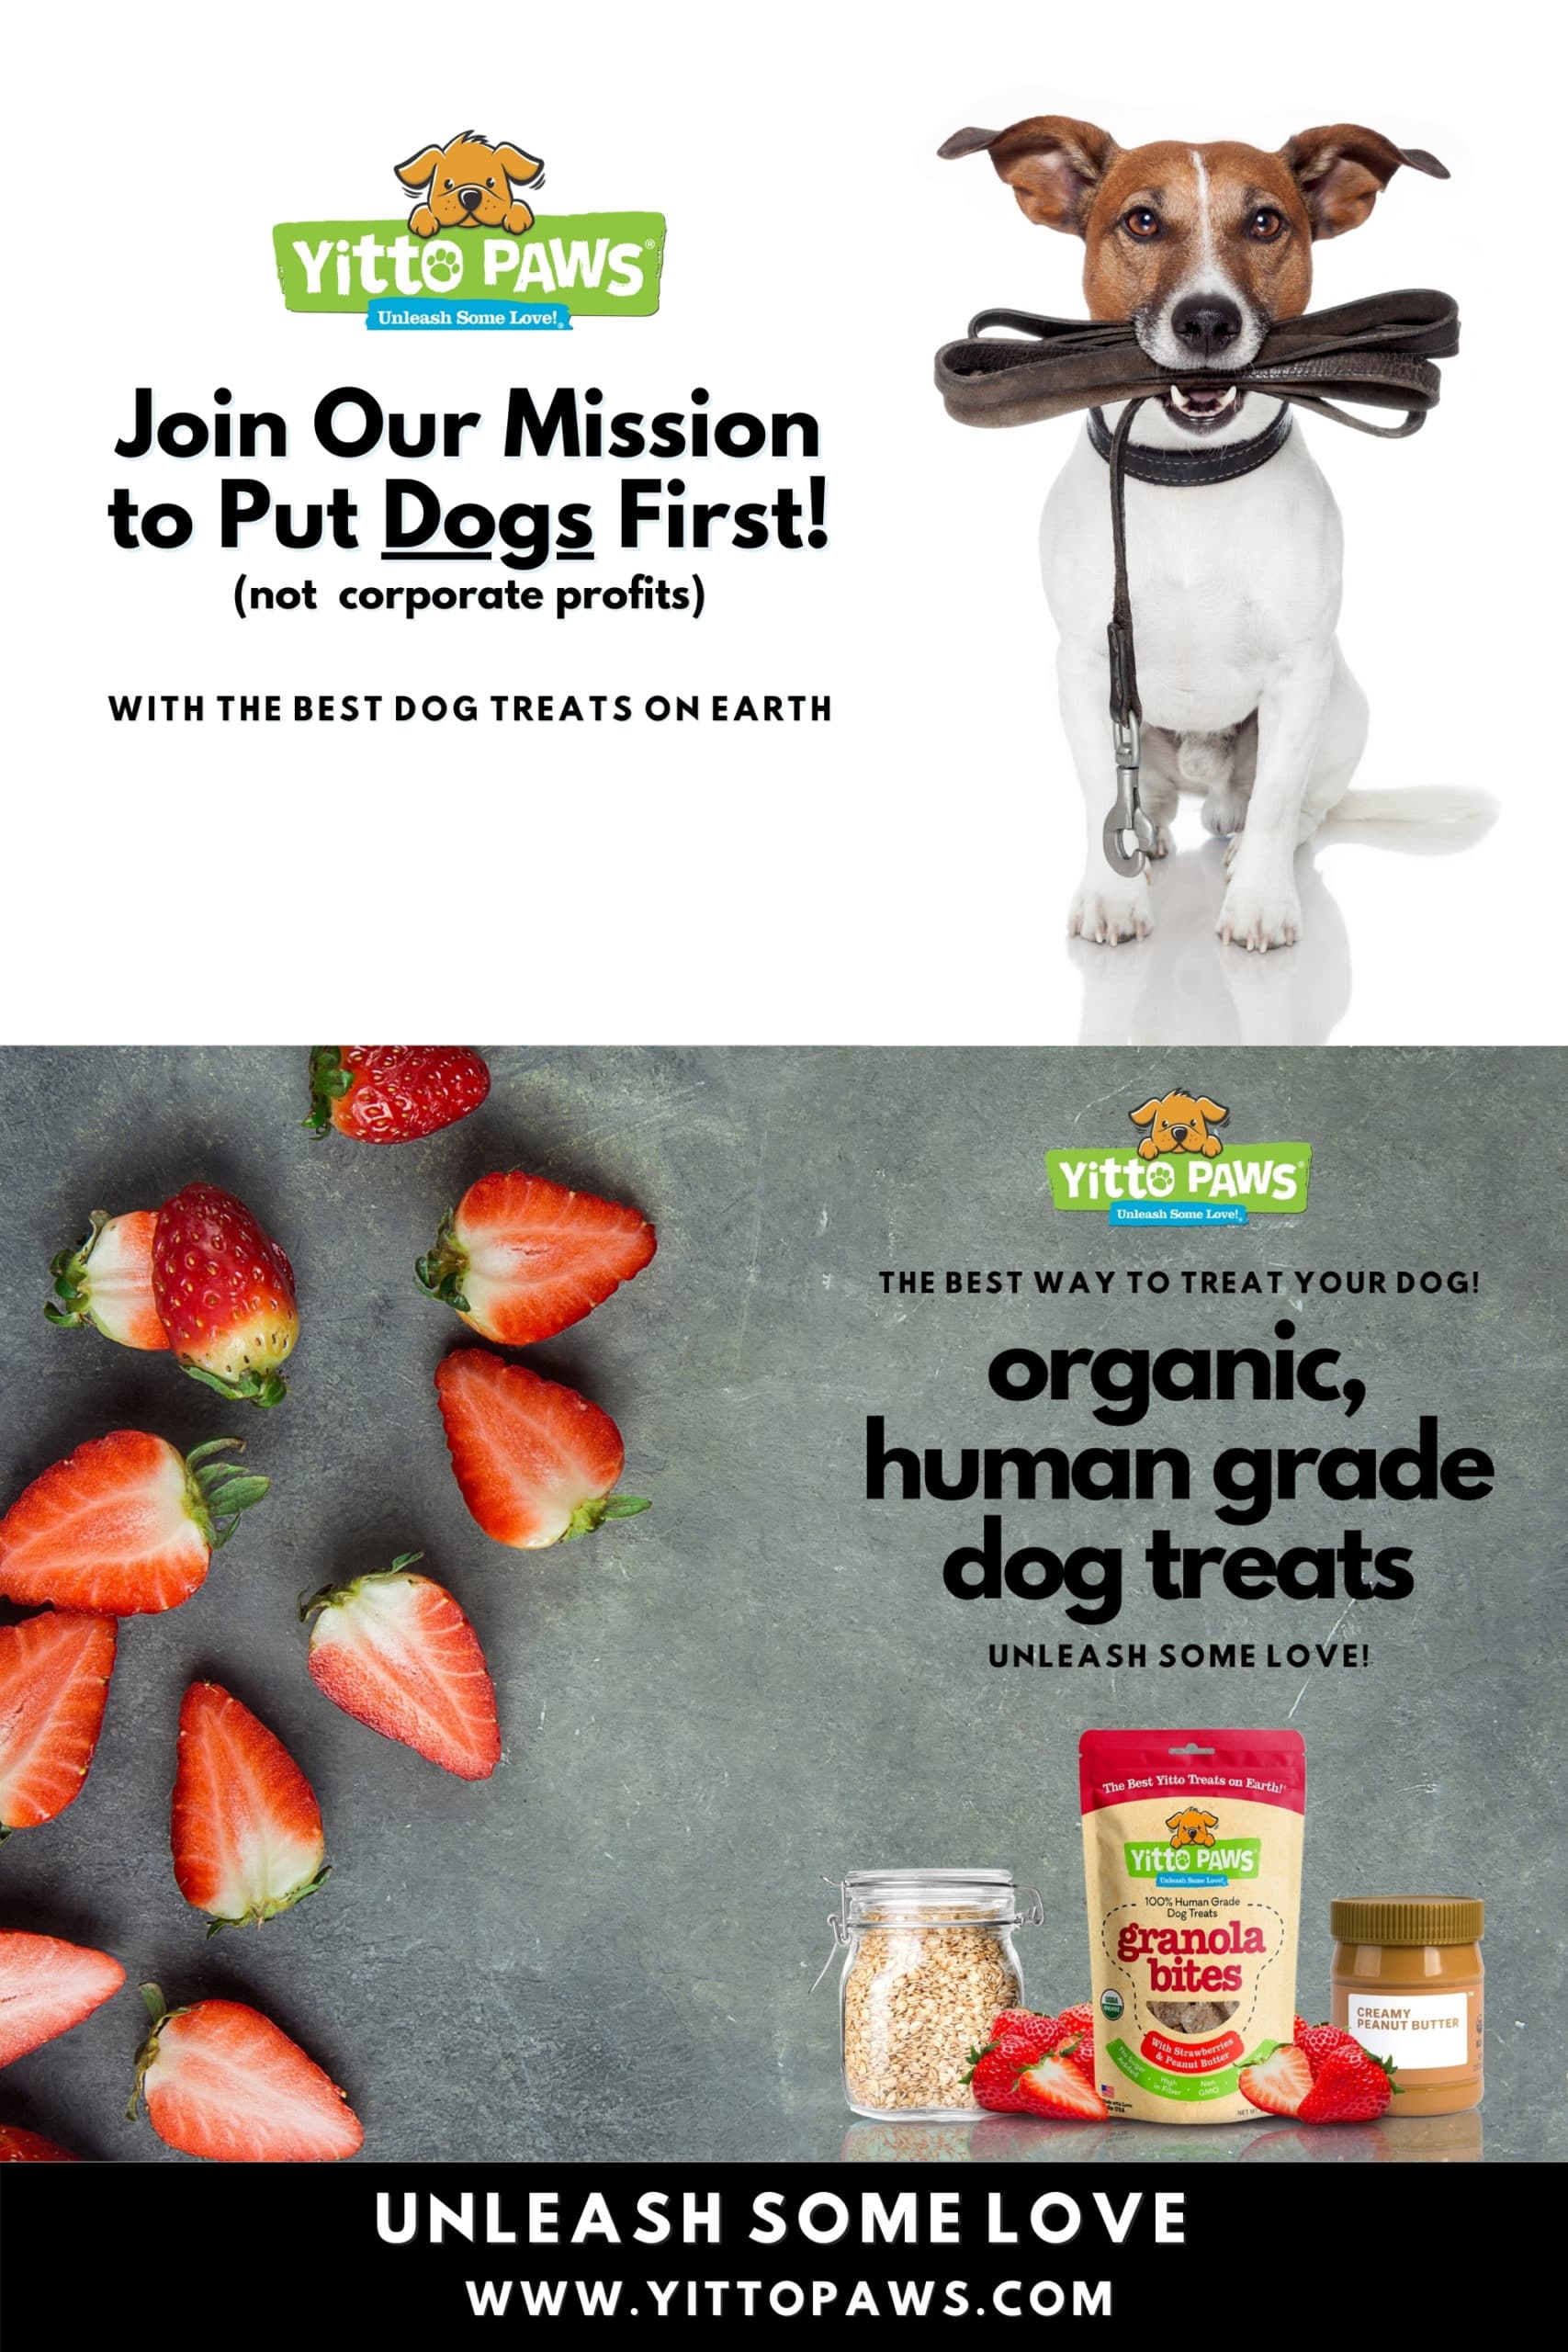 Join Our Mission at Yitto Paws to Put Dogs First!